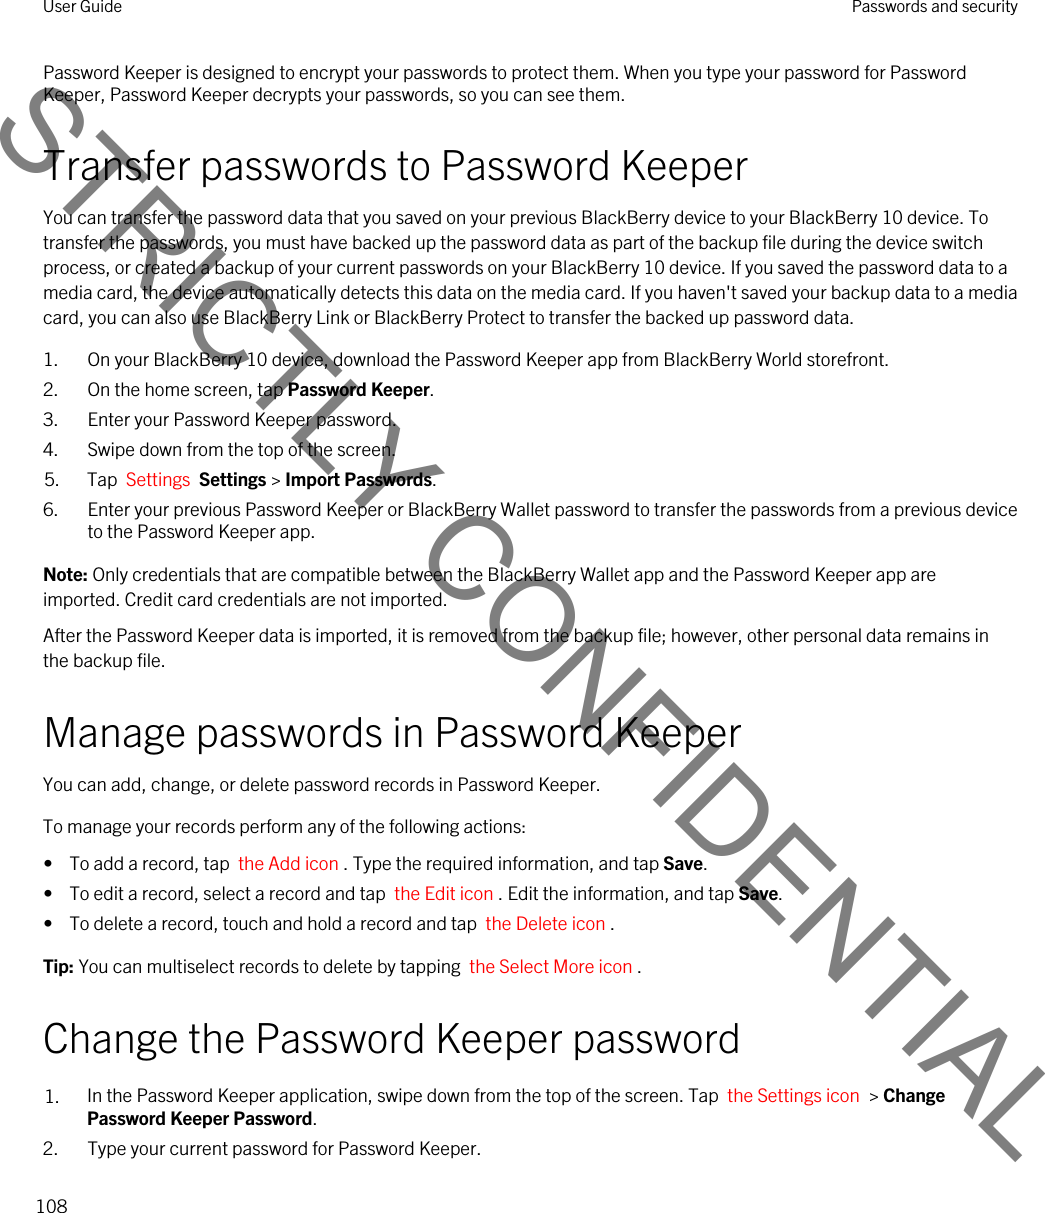 Password Keeper is designed to encrypt your passwords to protect them. When you type your password for Password Keeper, Password Keeper decrypts your passwords, so you can see them.Transfer passwords to Password KeeperYou can transfer the password data that you saved on your previous BlackBerry device to your BlackBerry 10 device. To transfer the passwords, you must have backed up the password data as part of the backup file during the device switch process, or created a backup of your current passwords on your BlackBerry 10 device. If you saved the password data to a media card, the device automatically detects this data on the media card. If you haven&apos;t saved your backup data to a media card, you can also use BlackBerry Link or BlackBerry Protect to transfer the backed up password data.1. On your BlackBerry 10 device, download the Password Keeper app from BlackBerry World storefront.2. On the home screen, tap Password Keeper.3. Enter your Password Keeper password.4. Swipe down from the top of the screen.5. Tap  Settings  Settings &gt; Import Passwords.6. Enter your previous Password Keeper or BlackBerry Wallet password to transfer the passwords from a previous device to the Password Keeper app.Note: Only credentials that are compatible between the BlackBerry Wallet app and the Password Keeper app are imported. Credit card credentials are not imported.After the Password Keeper data is imported, it is removed from the backup file; however, other personal data remains in the backup file.Manage passwords in Password KeeperYou can add, change, or delete password records in Password Keeper.To manage your records perform any of the following actions:•  To add a record, tap  the Add icon . Type the required information, and tap Save.•  To edit a record, select a record and tap  the Edit icon . Edit the information, and tap Save.•  To delete a record, touch and hold a record and tap  the Delete icon .Tip: You can multiselect records to delete by tapping  the Select More icon .Change the Password Keeper password1. In the Password Keeper application, swipe down from the top of the screen. Tap  the Settings icon  &gt; Change Password Keeper Password.2. Type your current password for Password Keeper.User Guide Passwords and security108STRICTLY CONFIDENTIAL